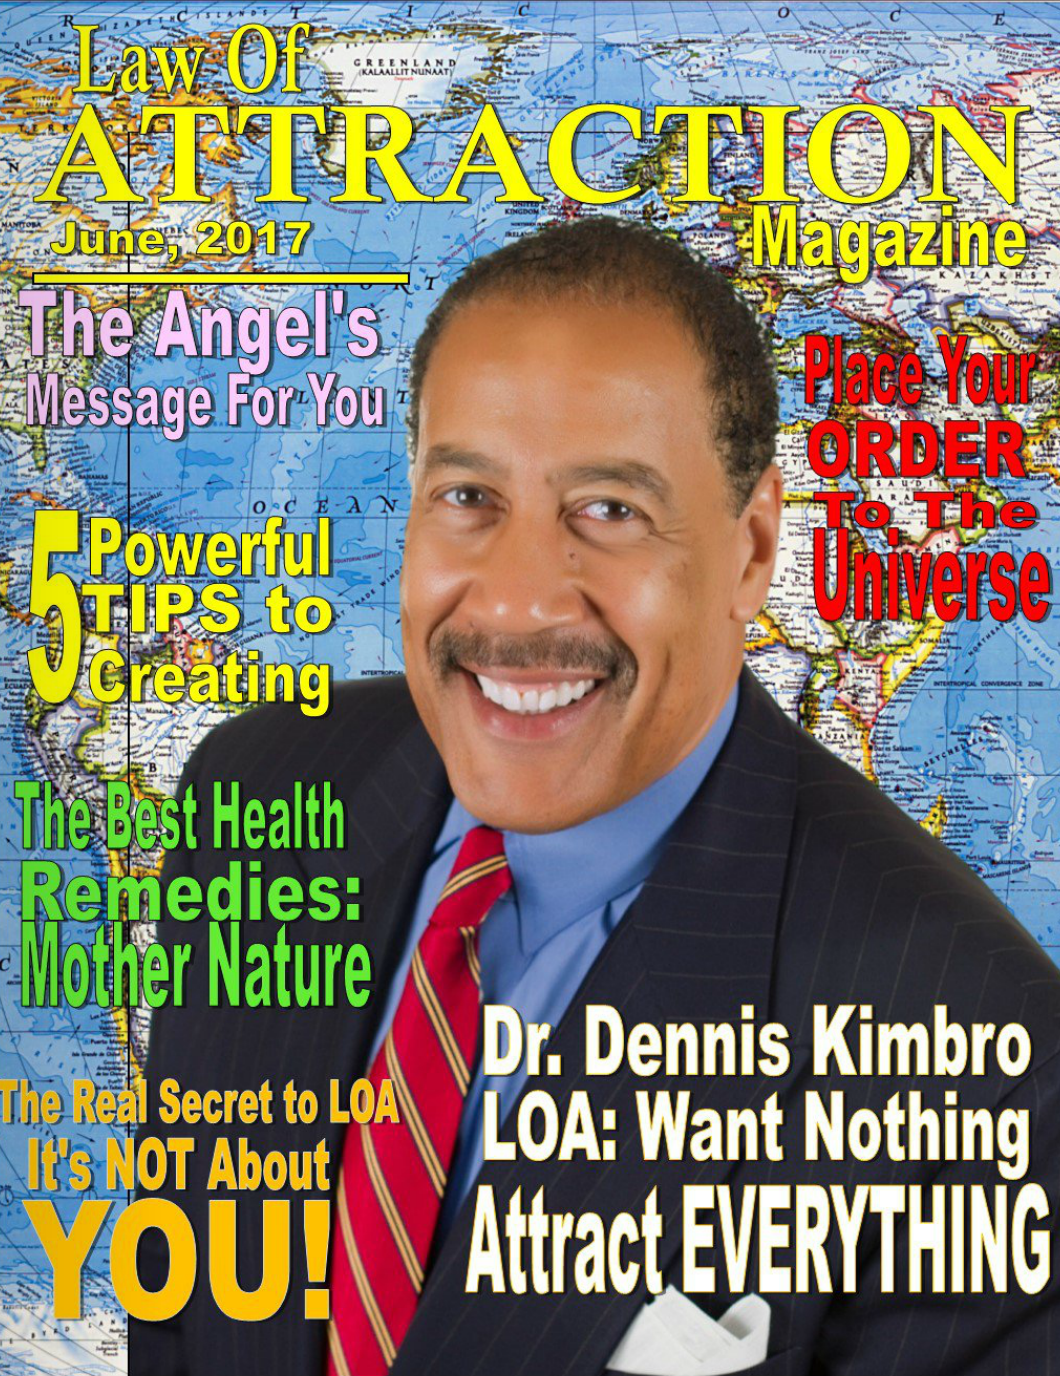 Dr. Kimbro is featured in the June 2017 Law of Attraction magazine